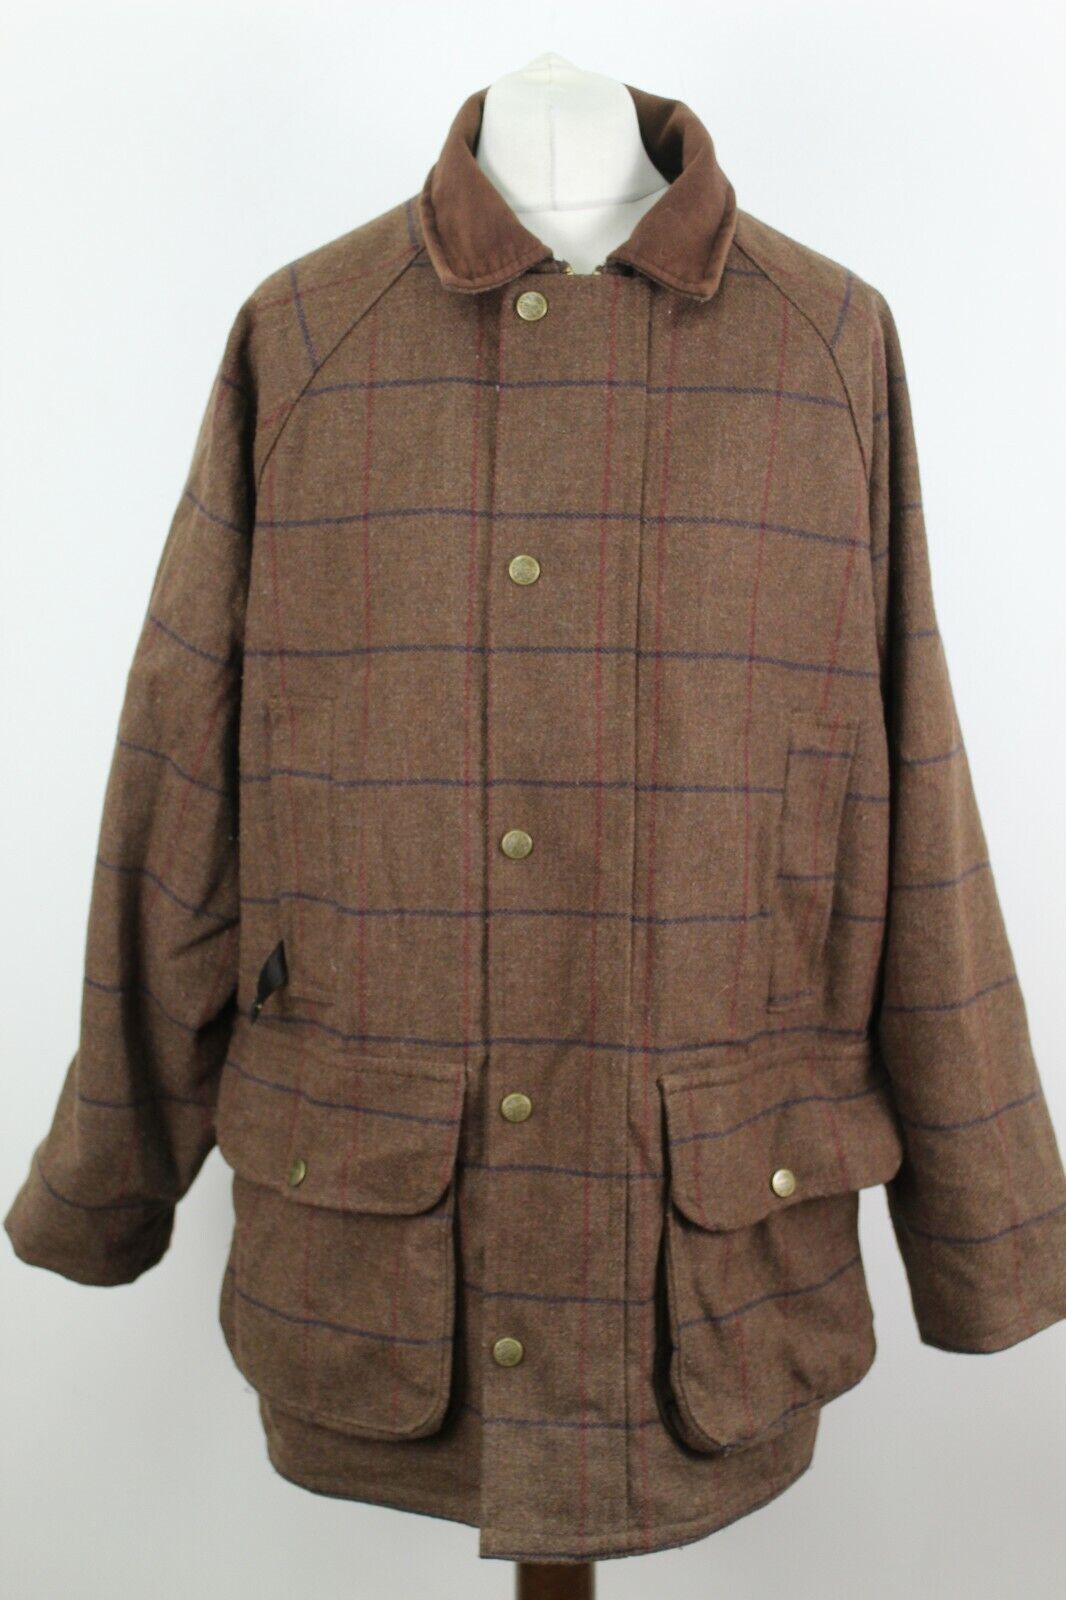 Details zu  FIELD PRO Hoggs Of Fife Hunting Shooting Tweed Jacket Size XL Sofortige Lieferung HEISS